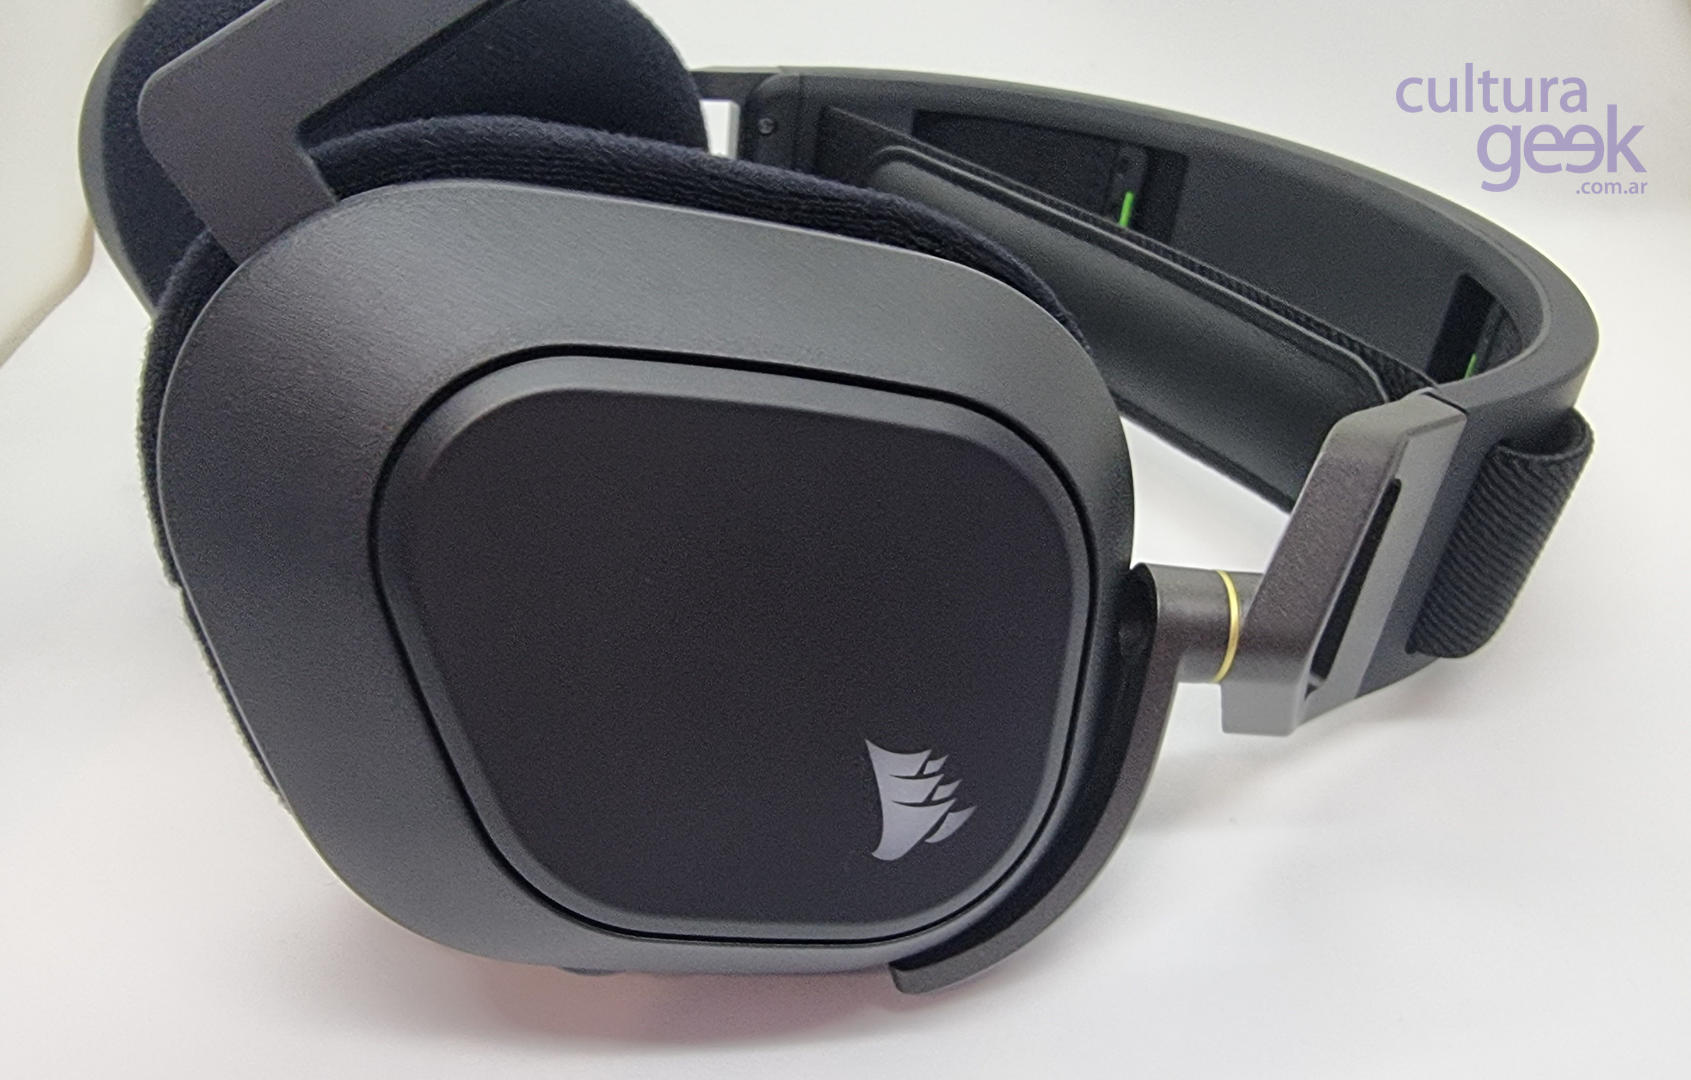 Review Corsair Hs80 Rgb Wireless Headphones: immersive gaming with Dolby Atmos and slipstream for PC, PS4 and PS5